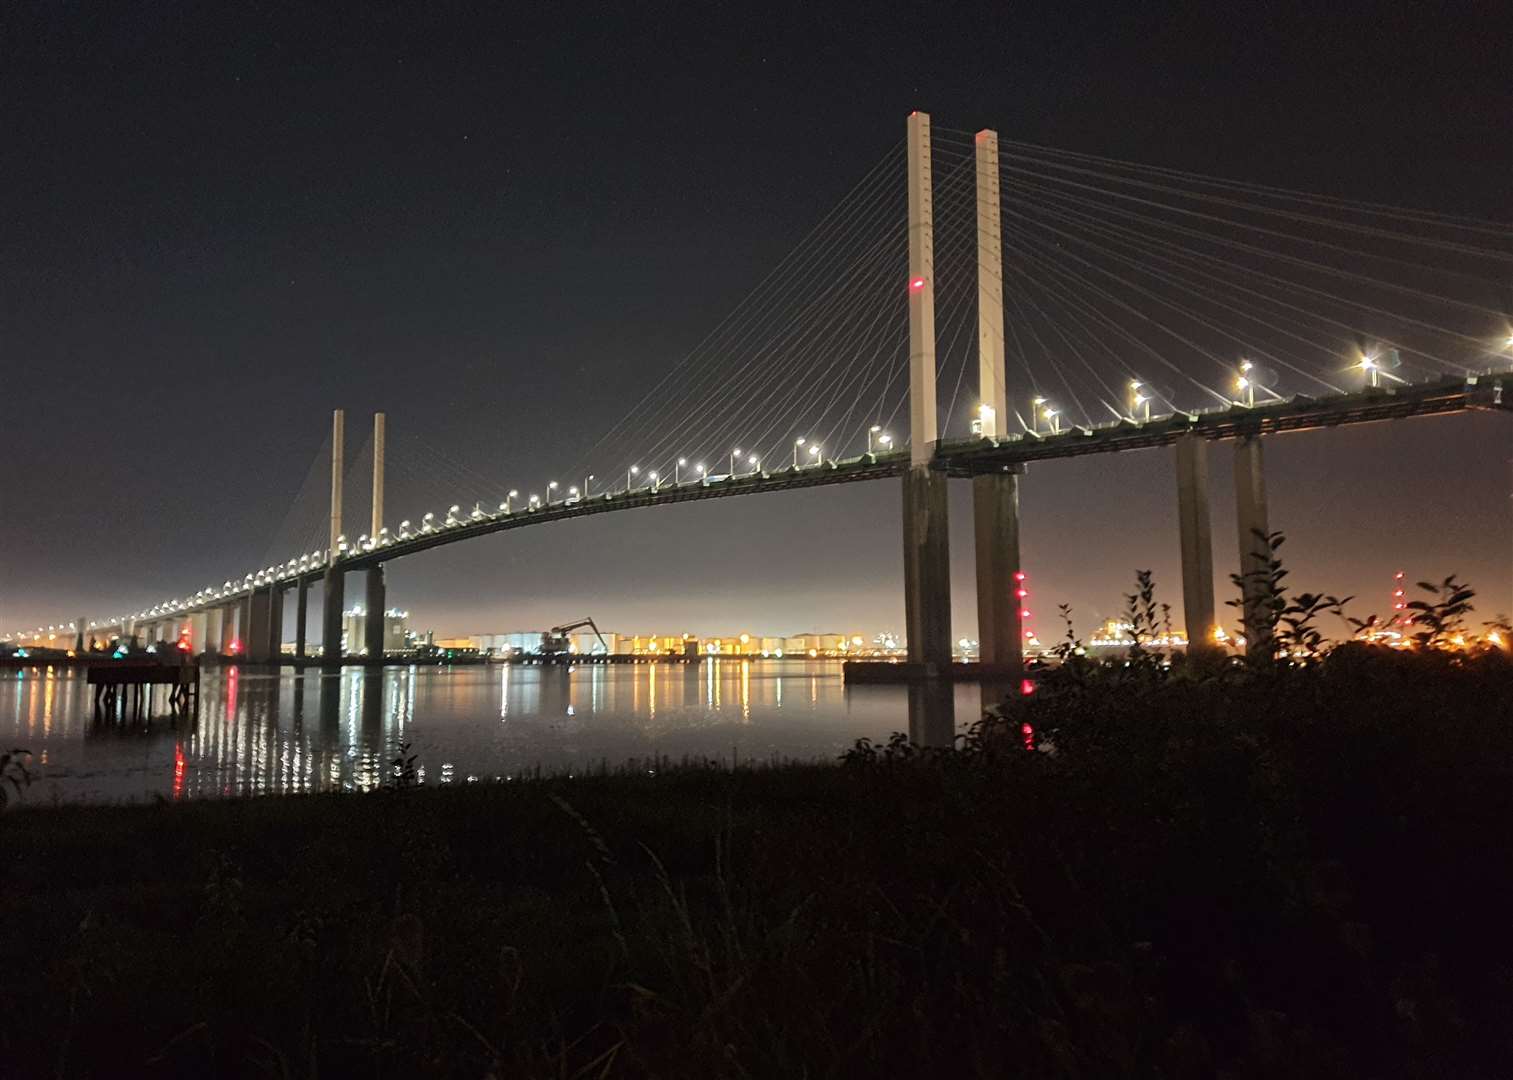 The Dartford Crossing, which joins onto the M25 orbital network Picture: UrbeXUntold